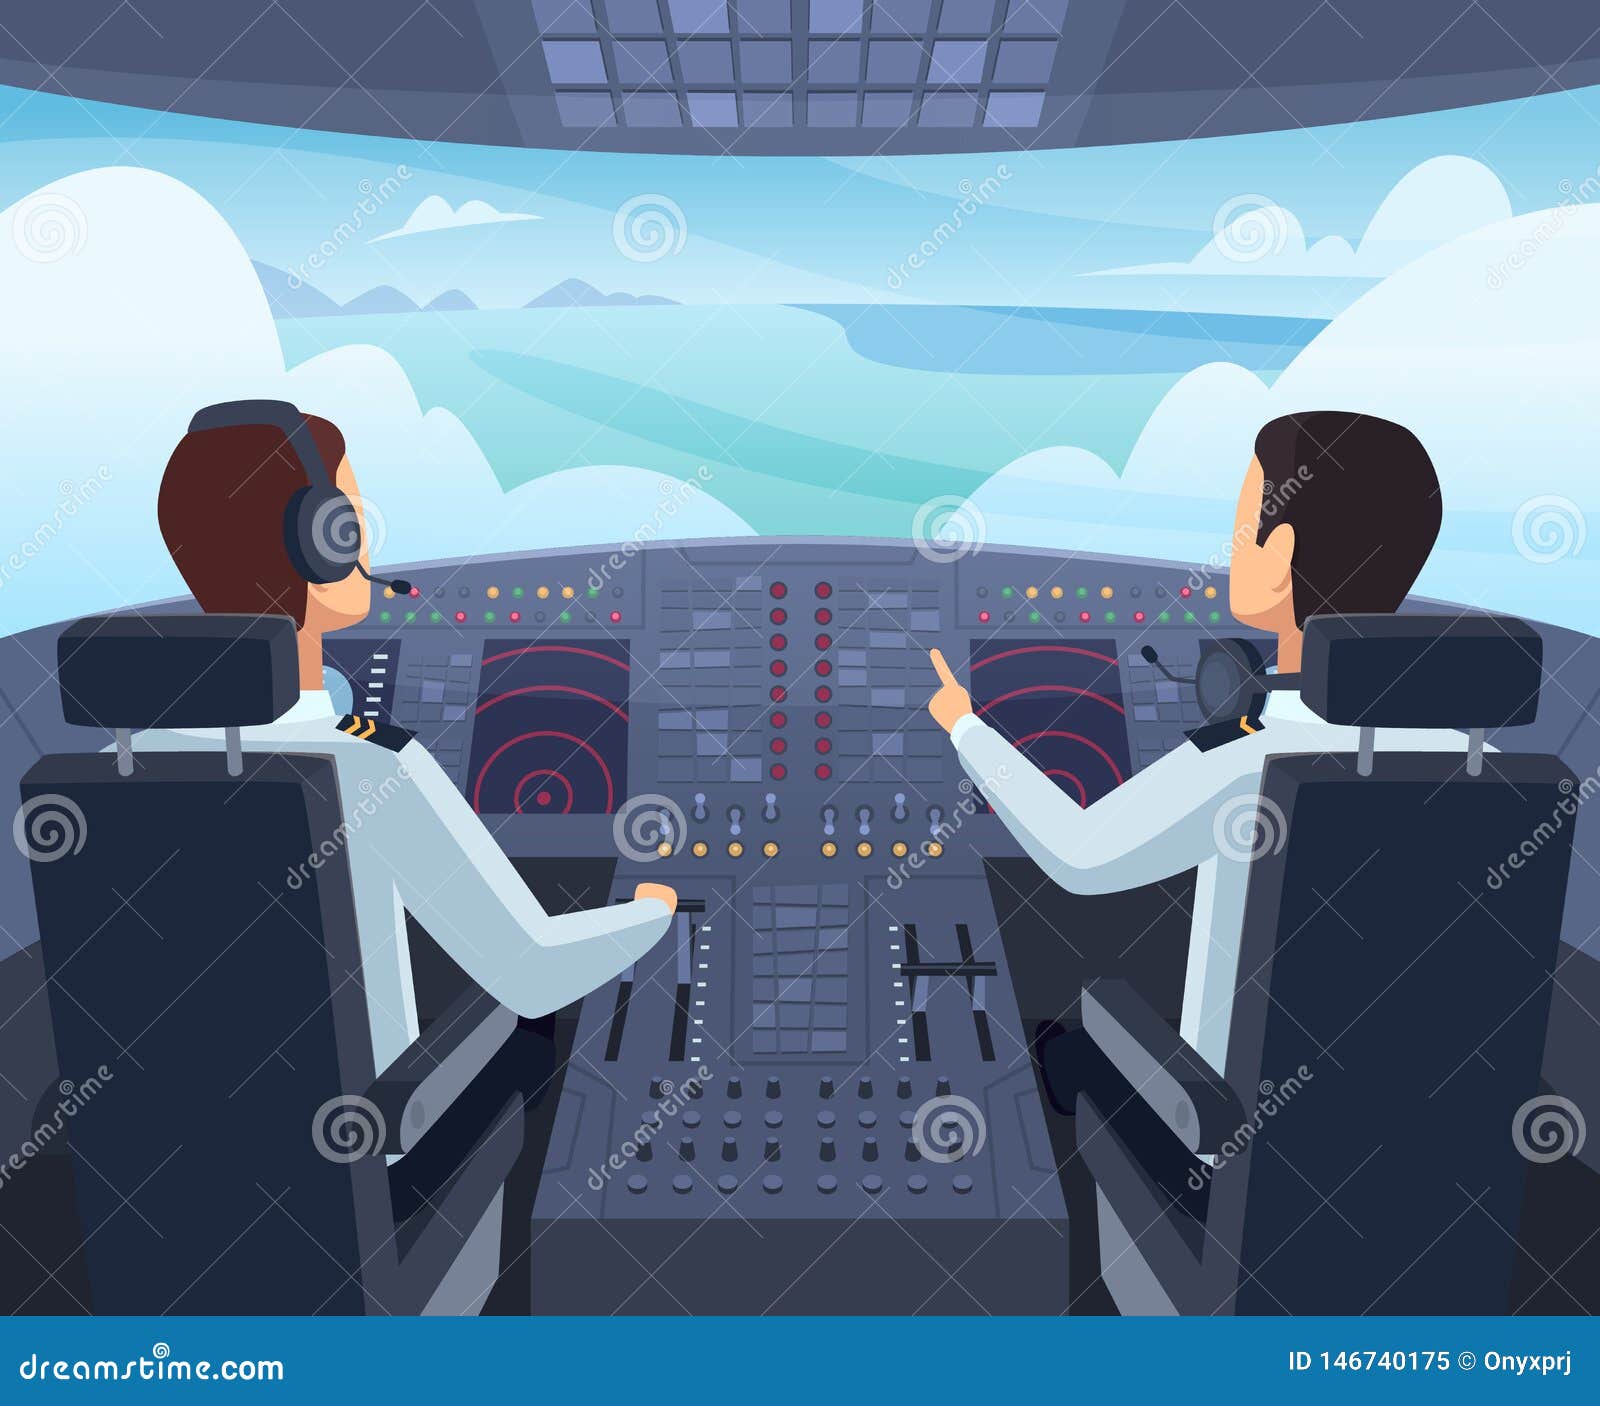 airplane cockpit. pilots sitting front of dashboard aircraft inside  cartoon s